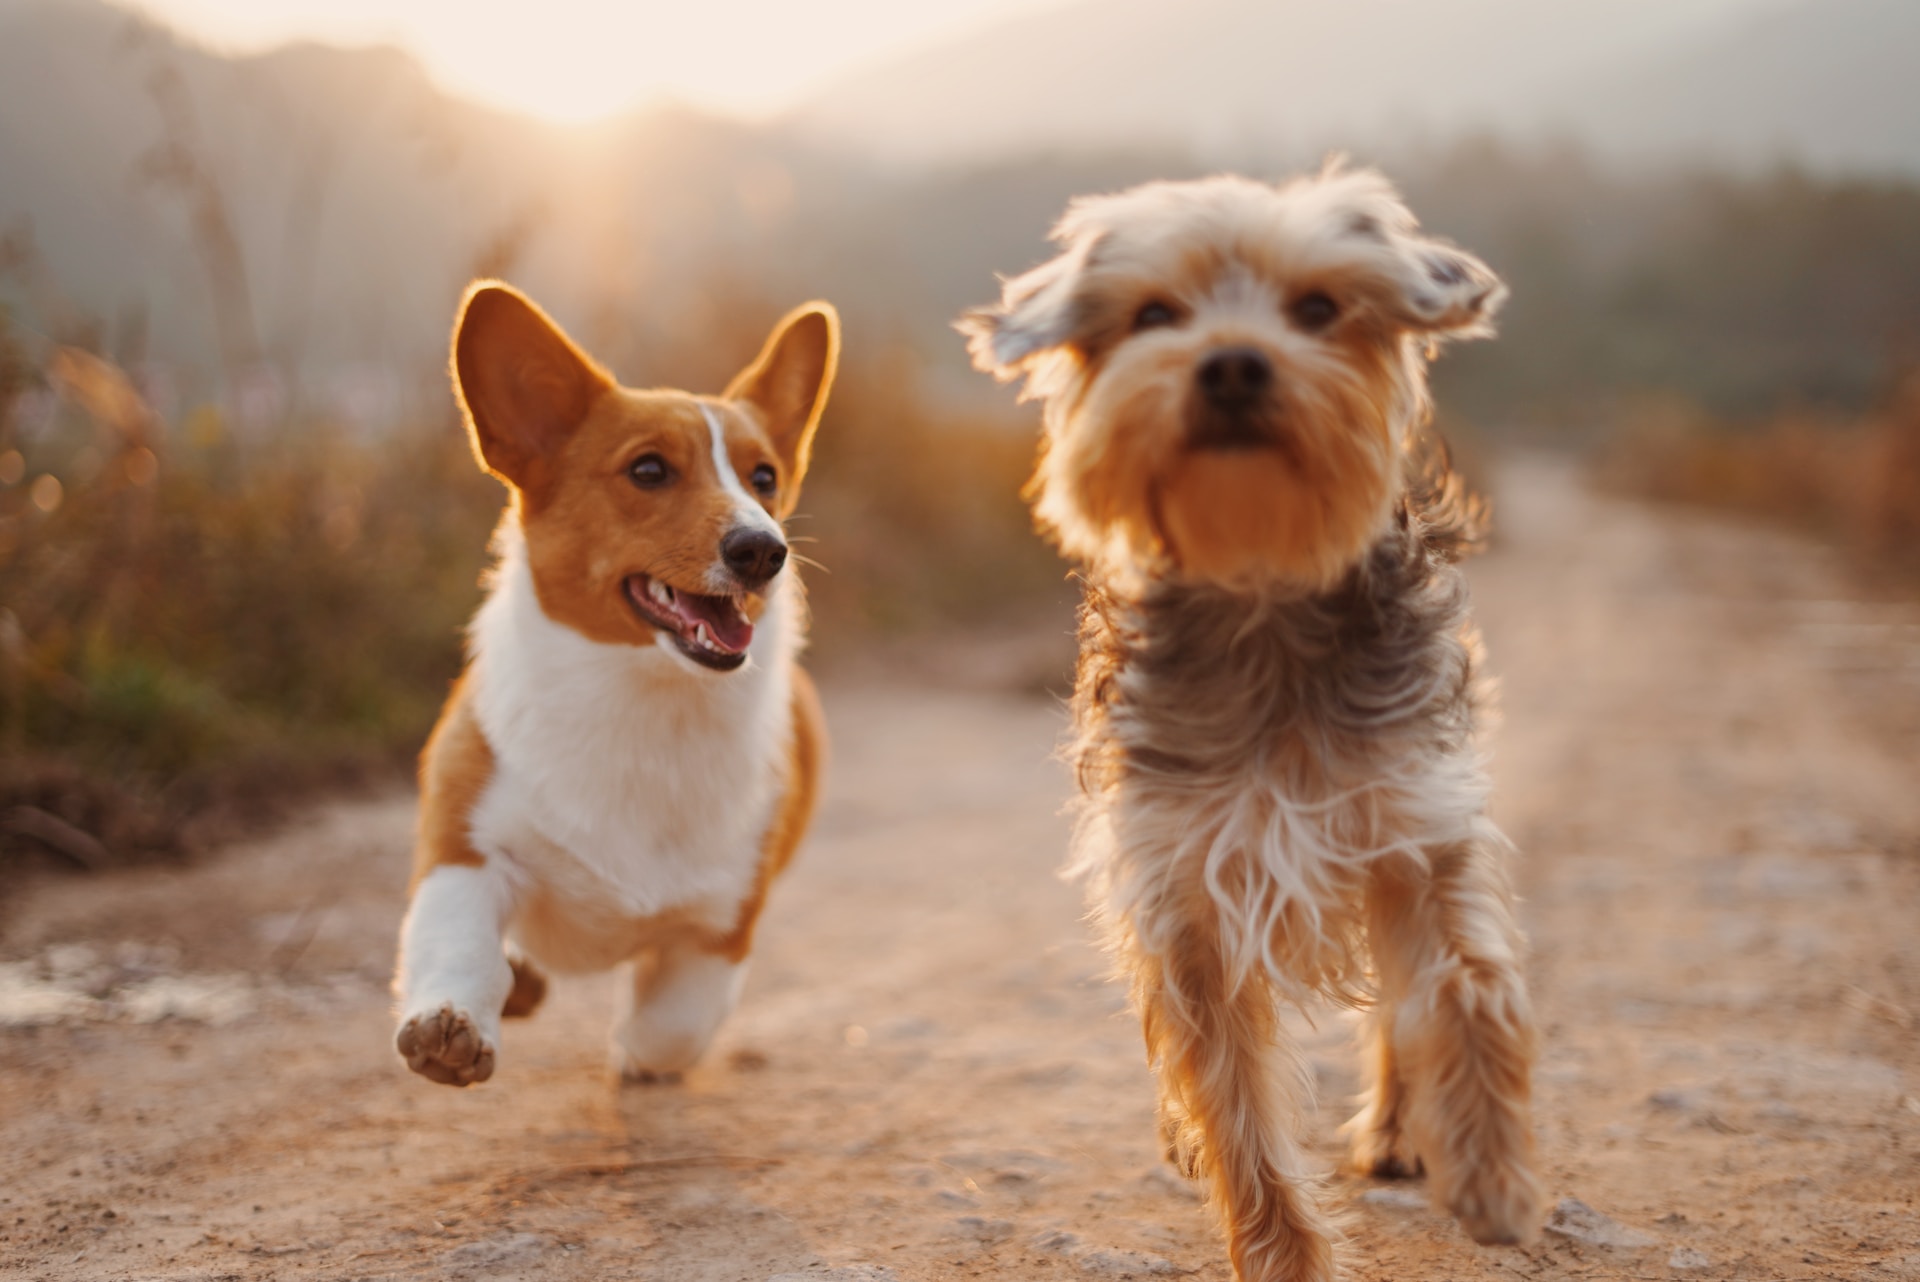 Two dogs running on dirt road